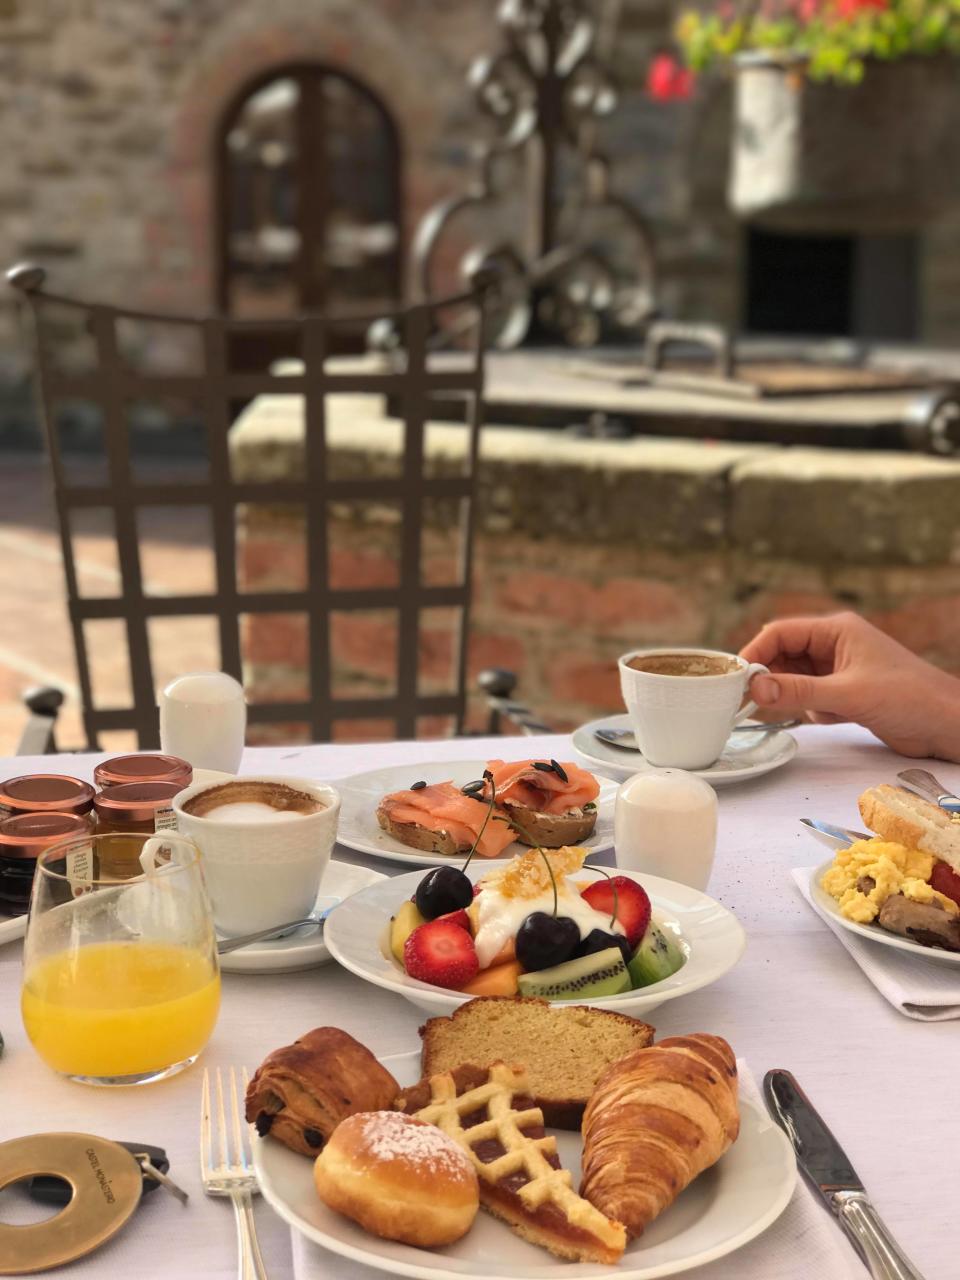 A medieval castle square is the breakfast setting at Castel Monastero. Serving 10th century vibes indeed. Photo: Yahoo Australia